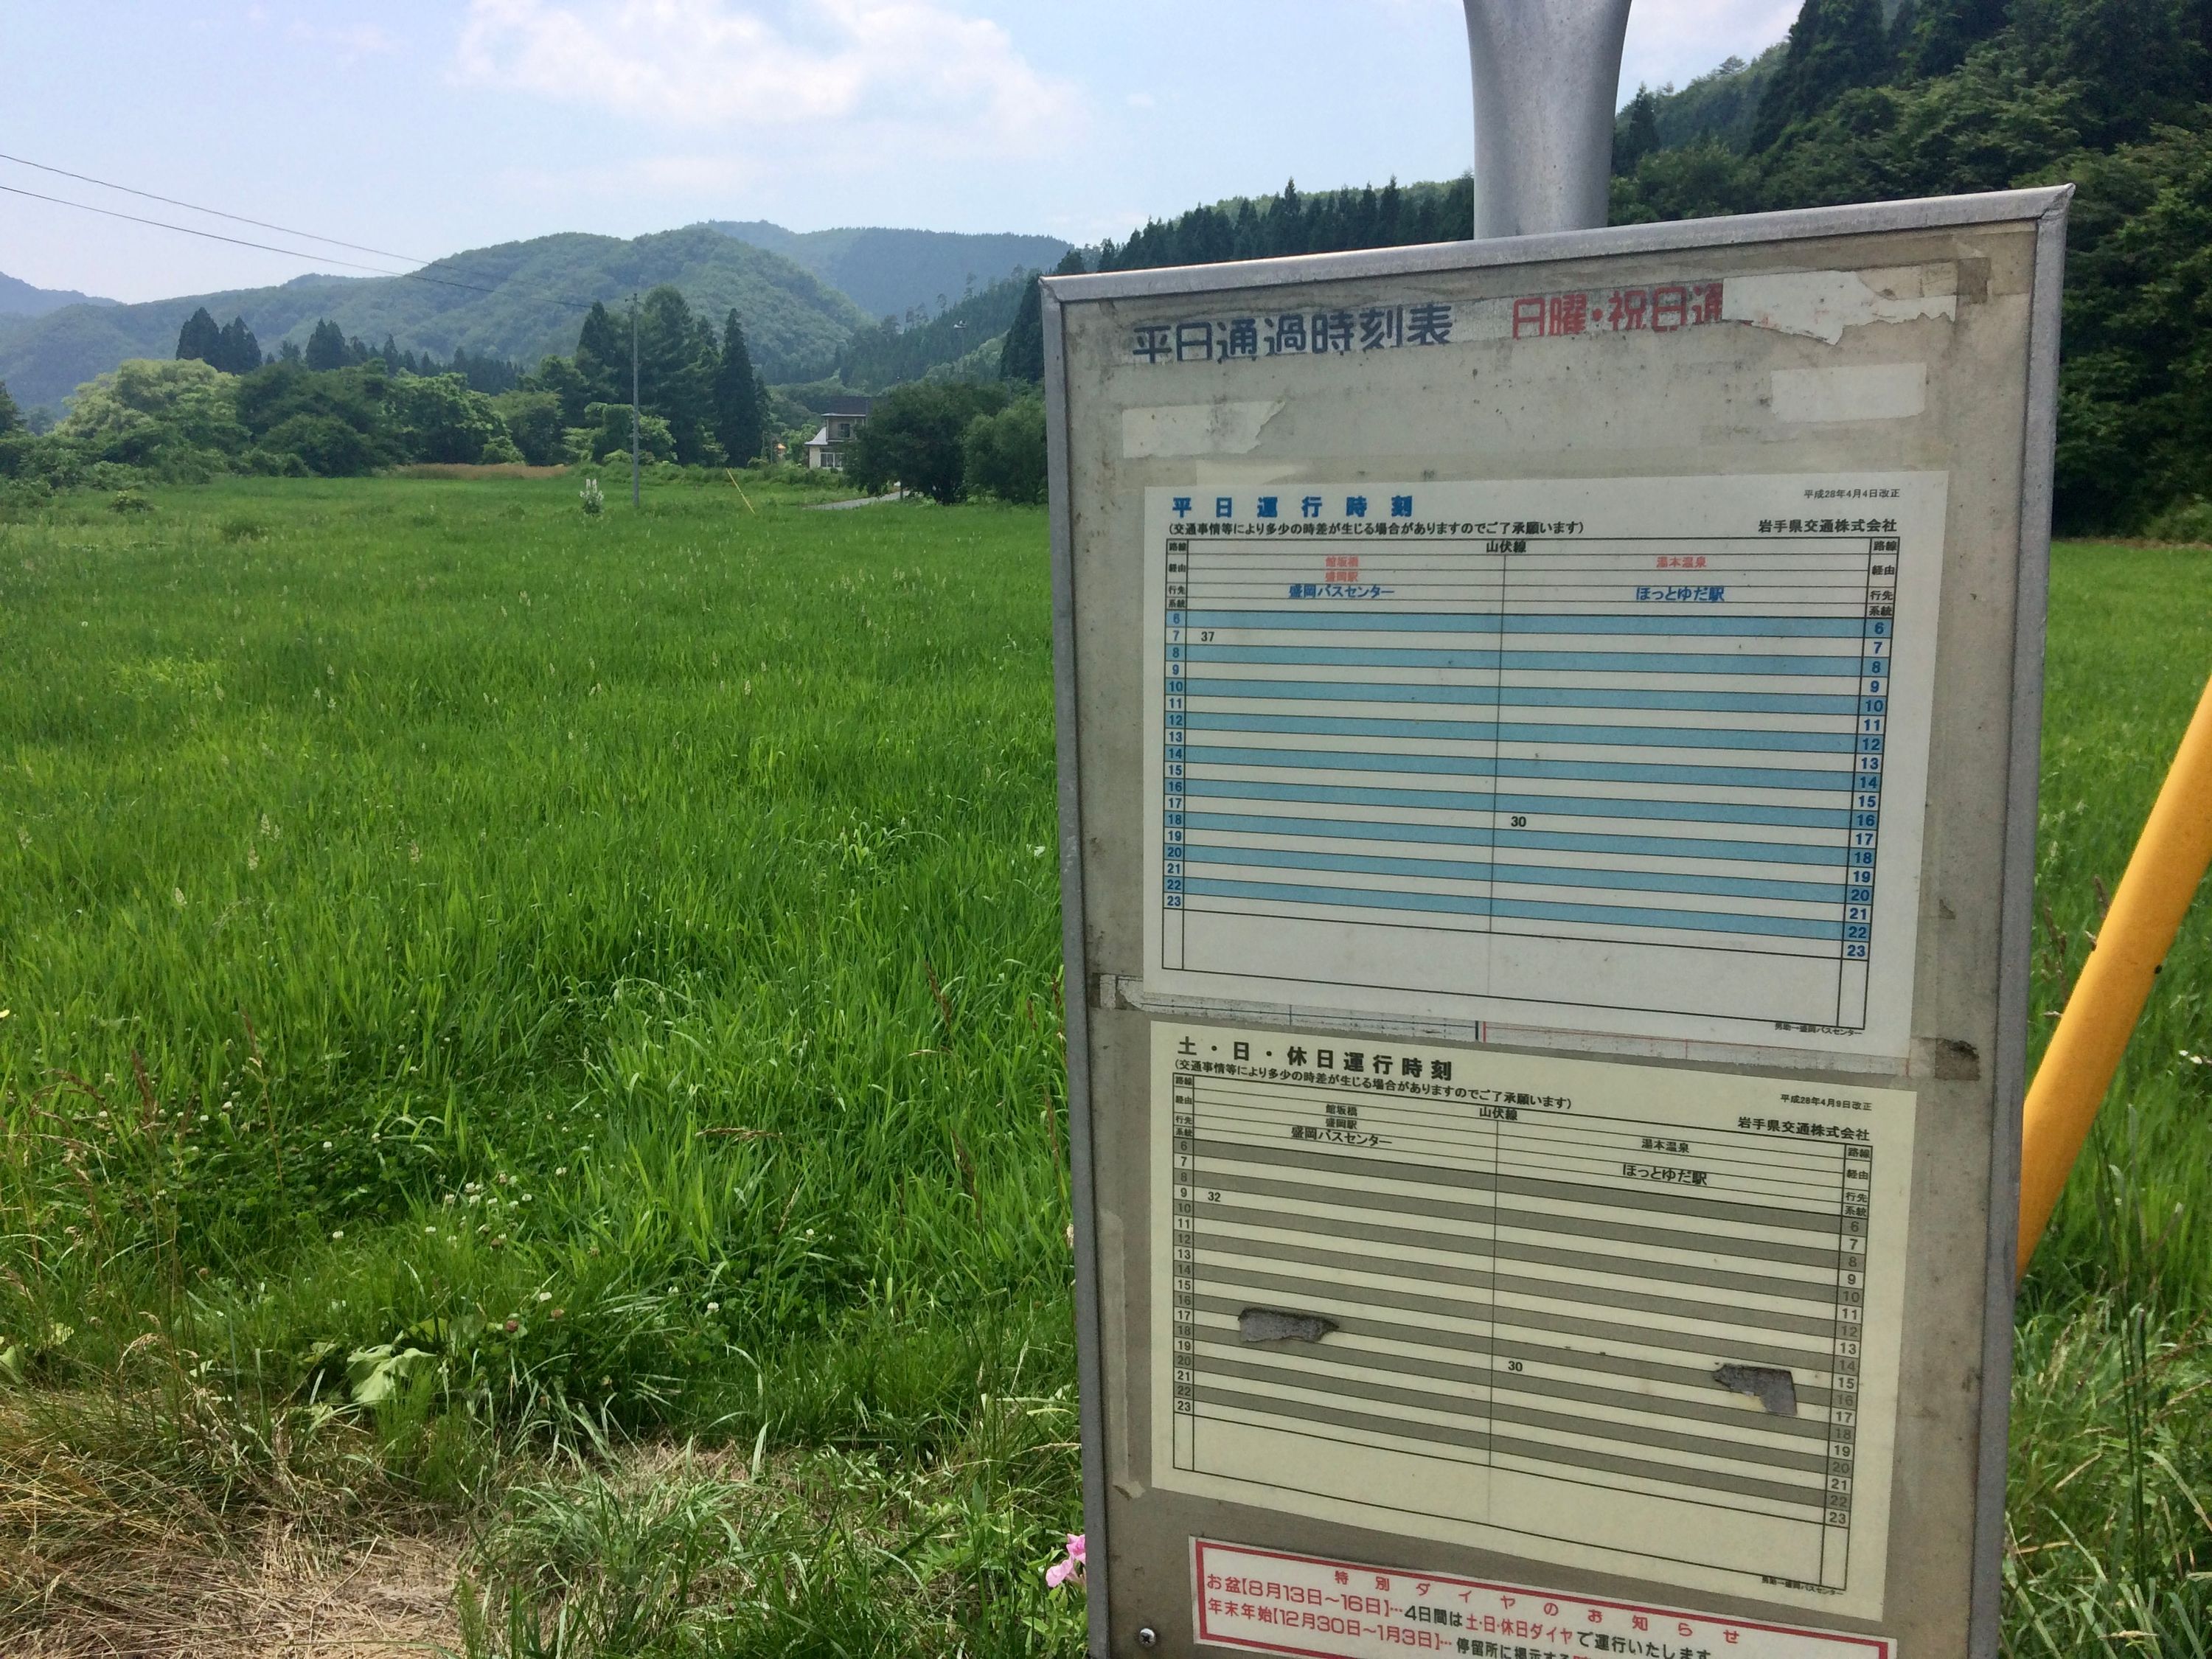 A bus schedule by a rice field shows a total of two buses a day.